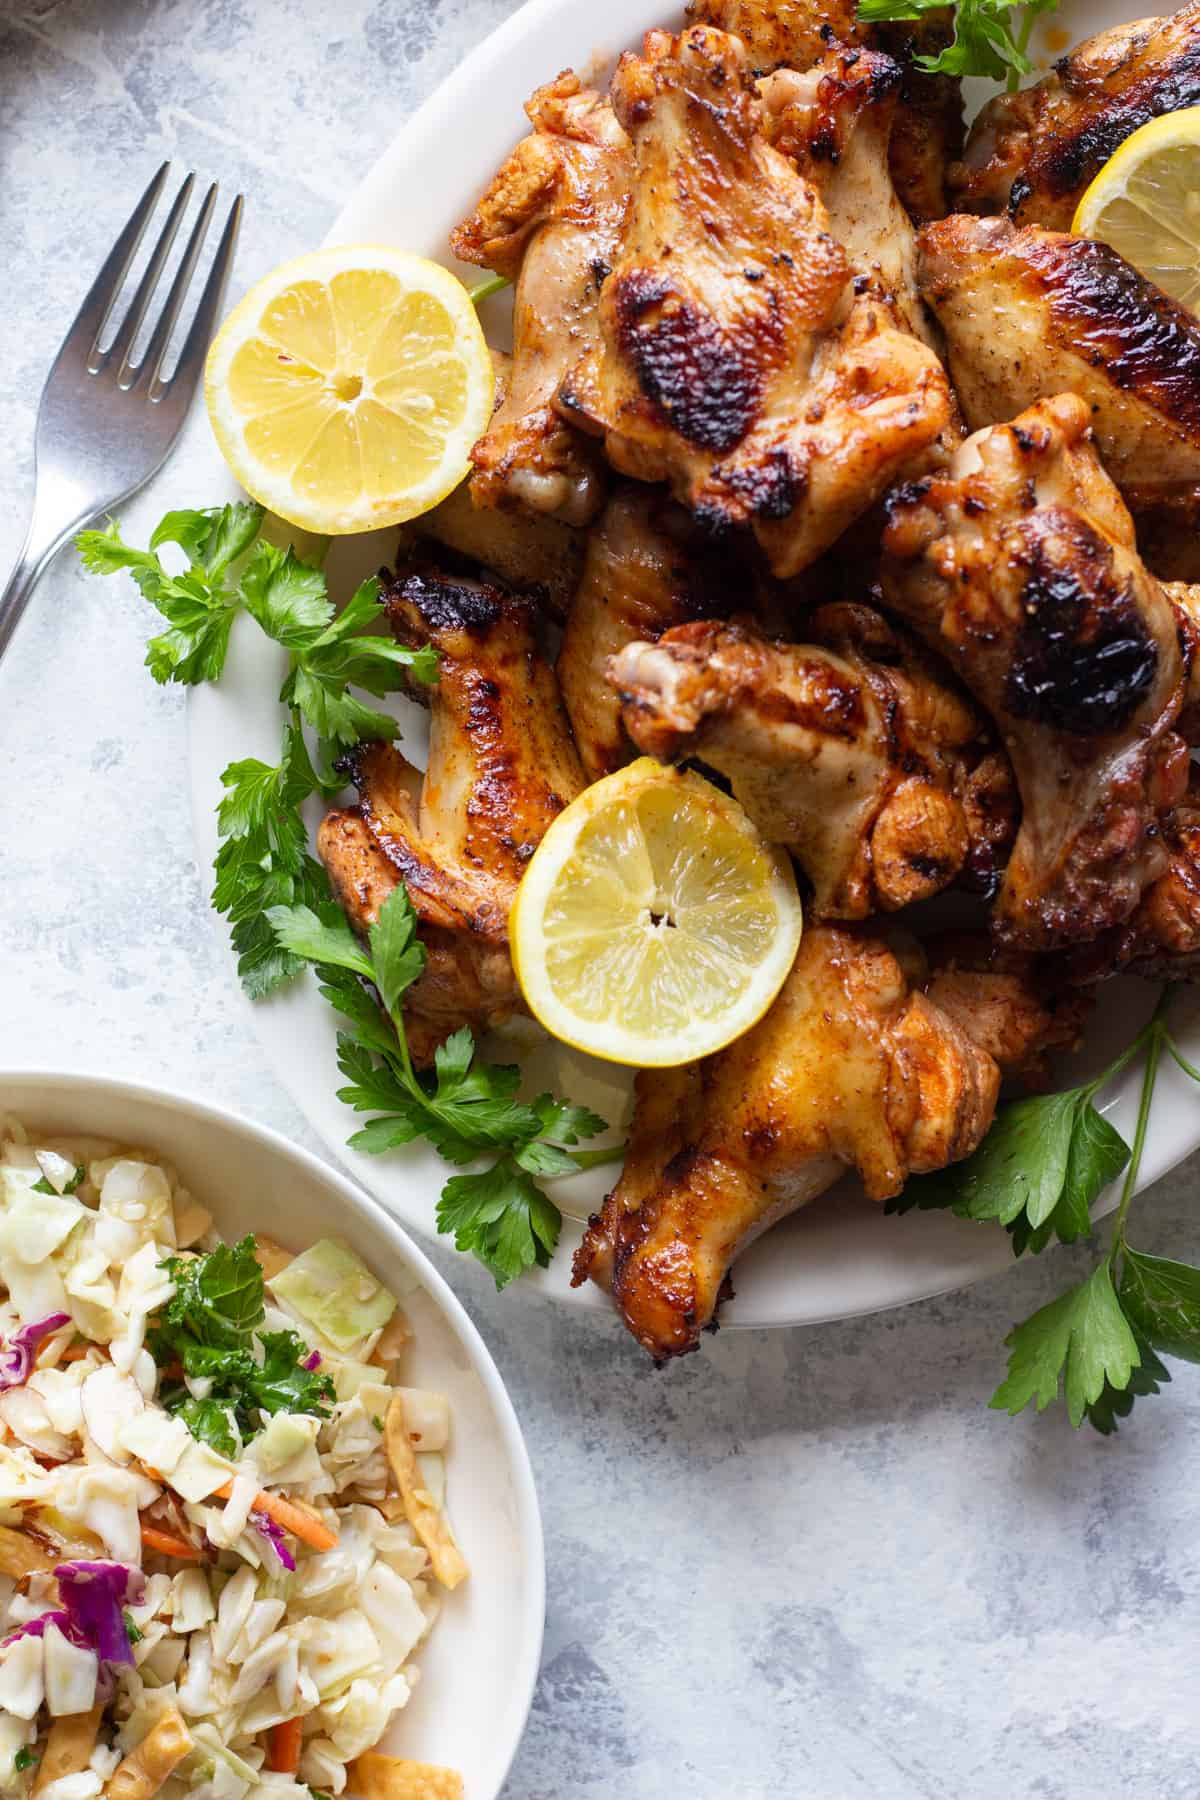 Grilled chicken wings are delicious and simple to make. Learn how to make juicy and tasty spicy chicken wings on your gas or charcoal grill. 